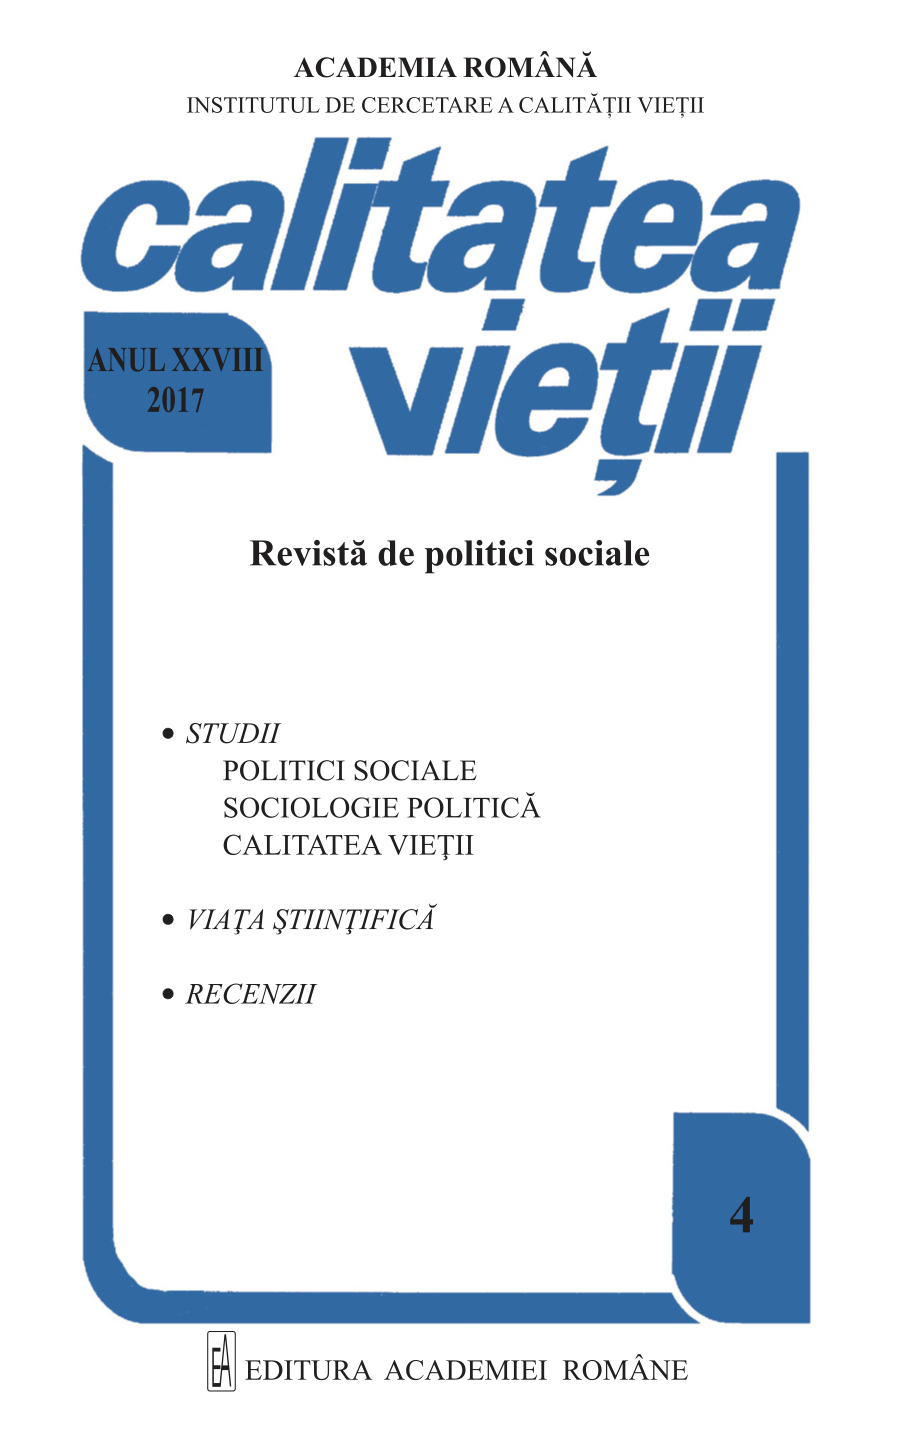 Effects and aspects of civical engagement in Romanian high-school Cover Image